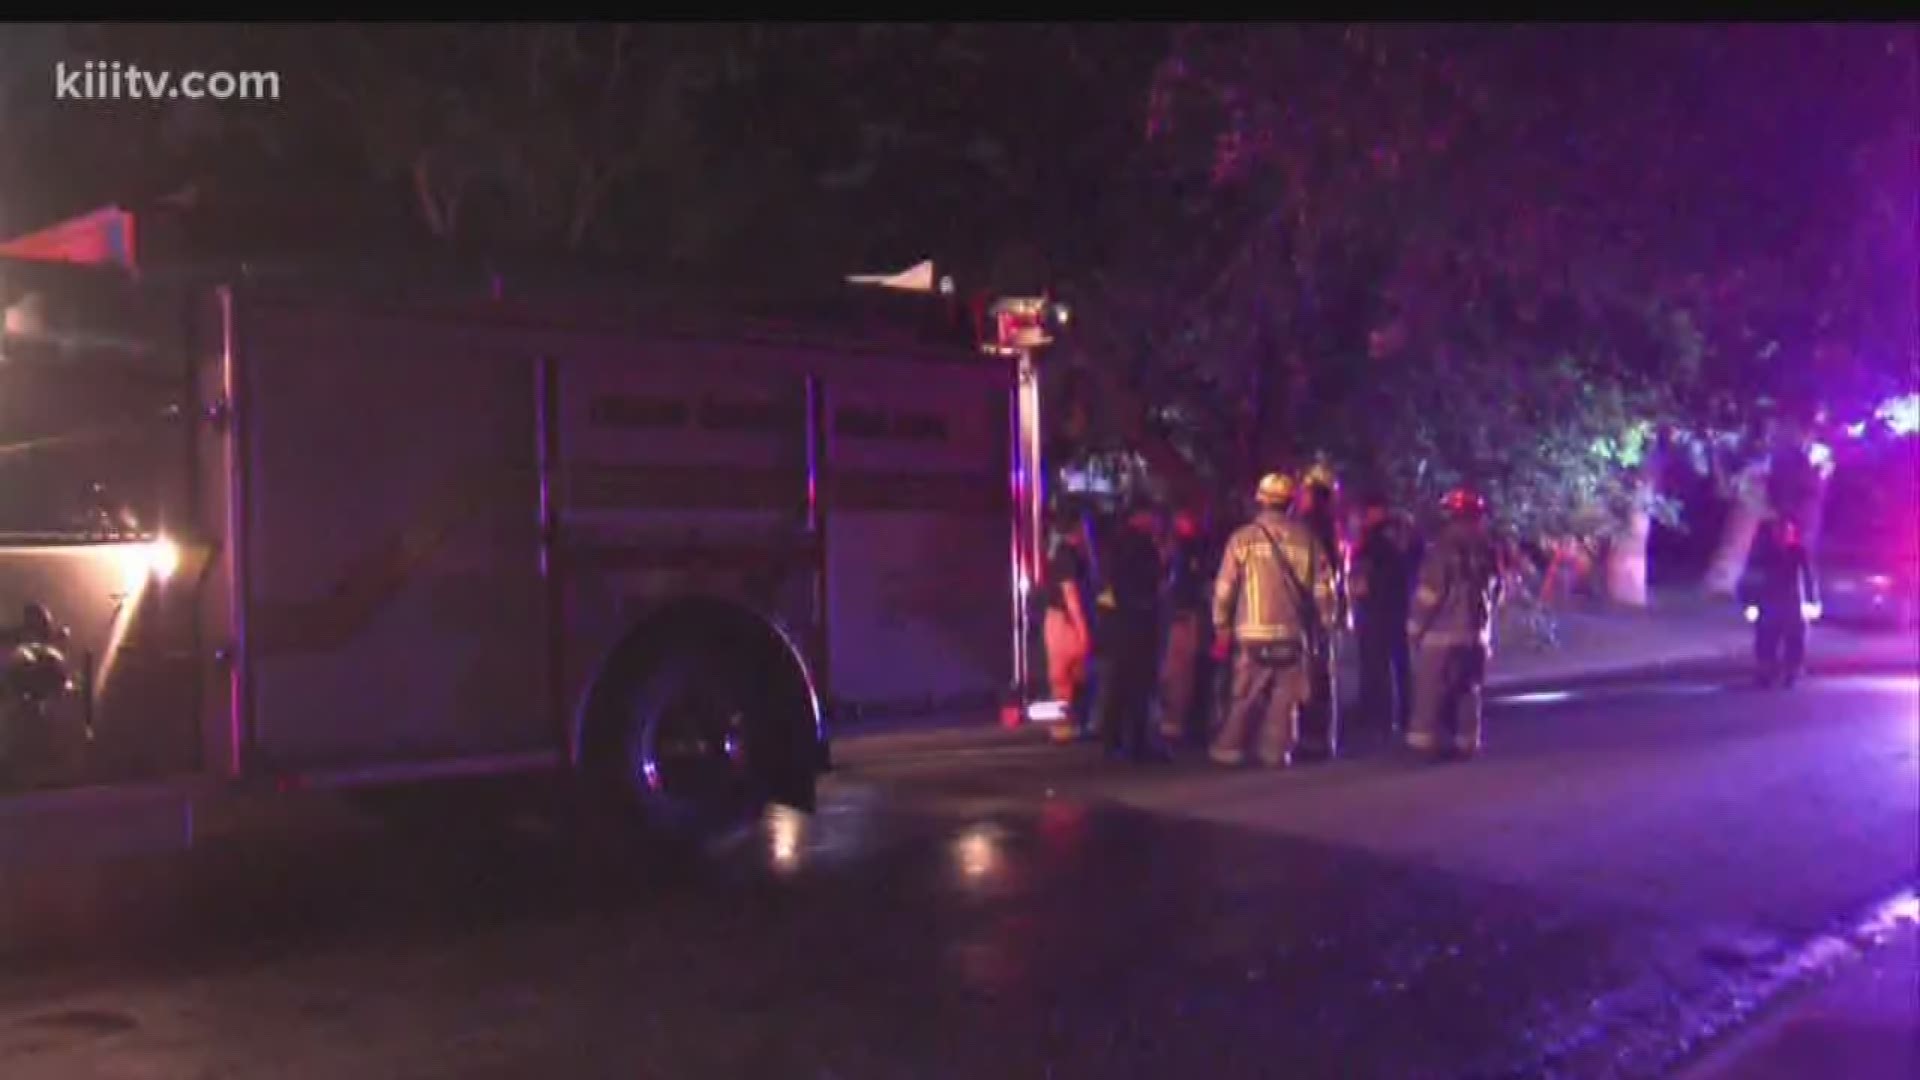 Officials investigating cause of fire at vacant home